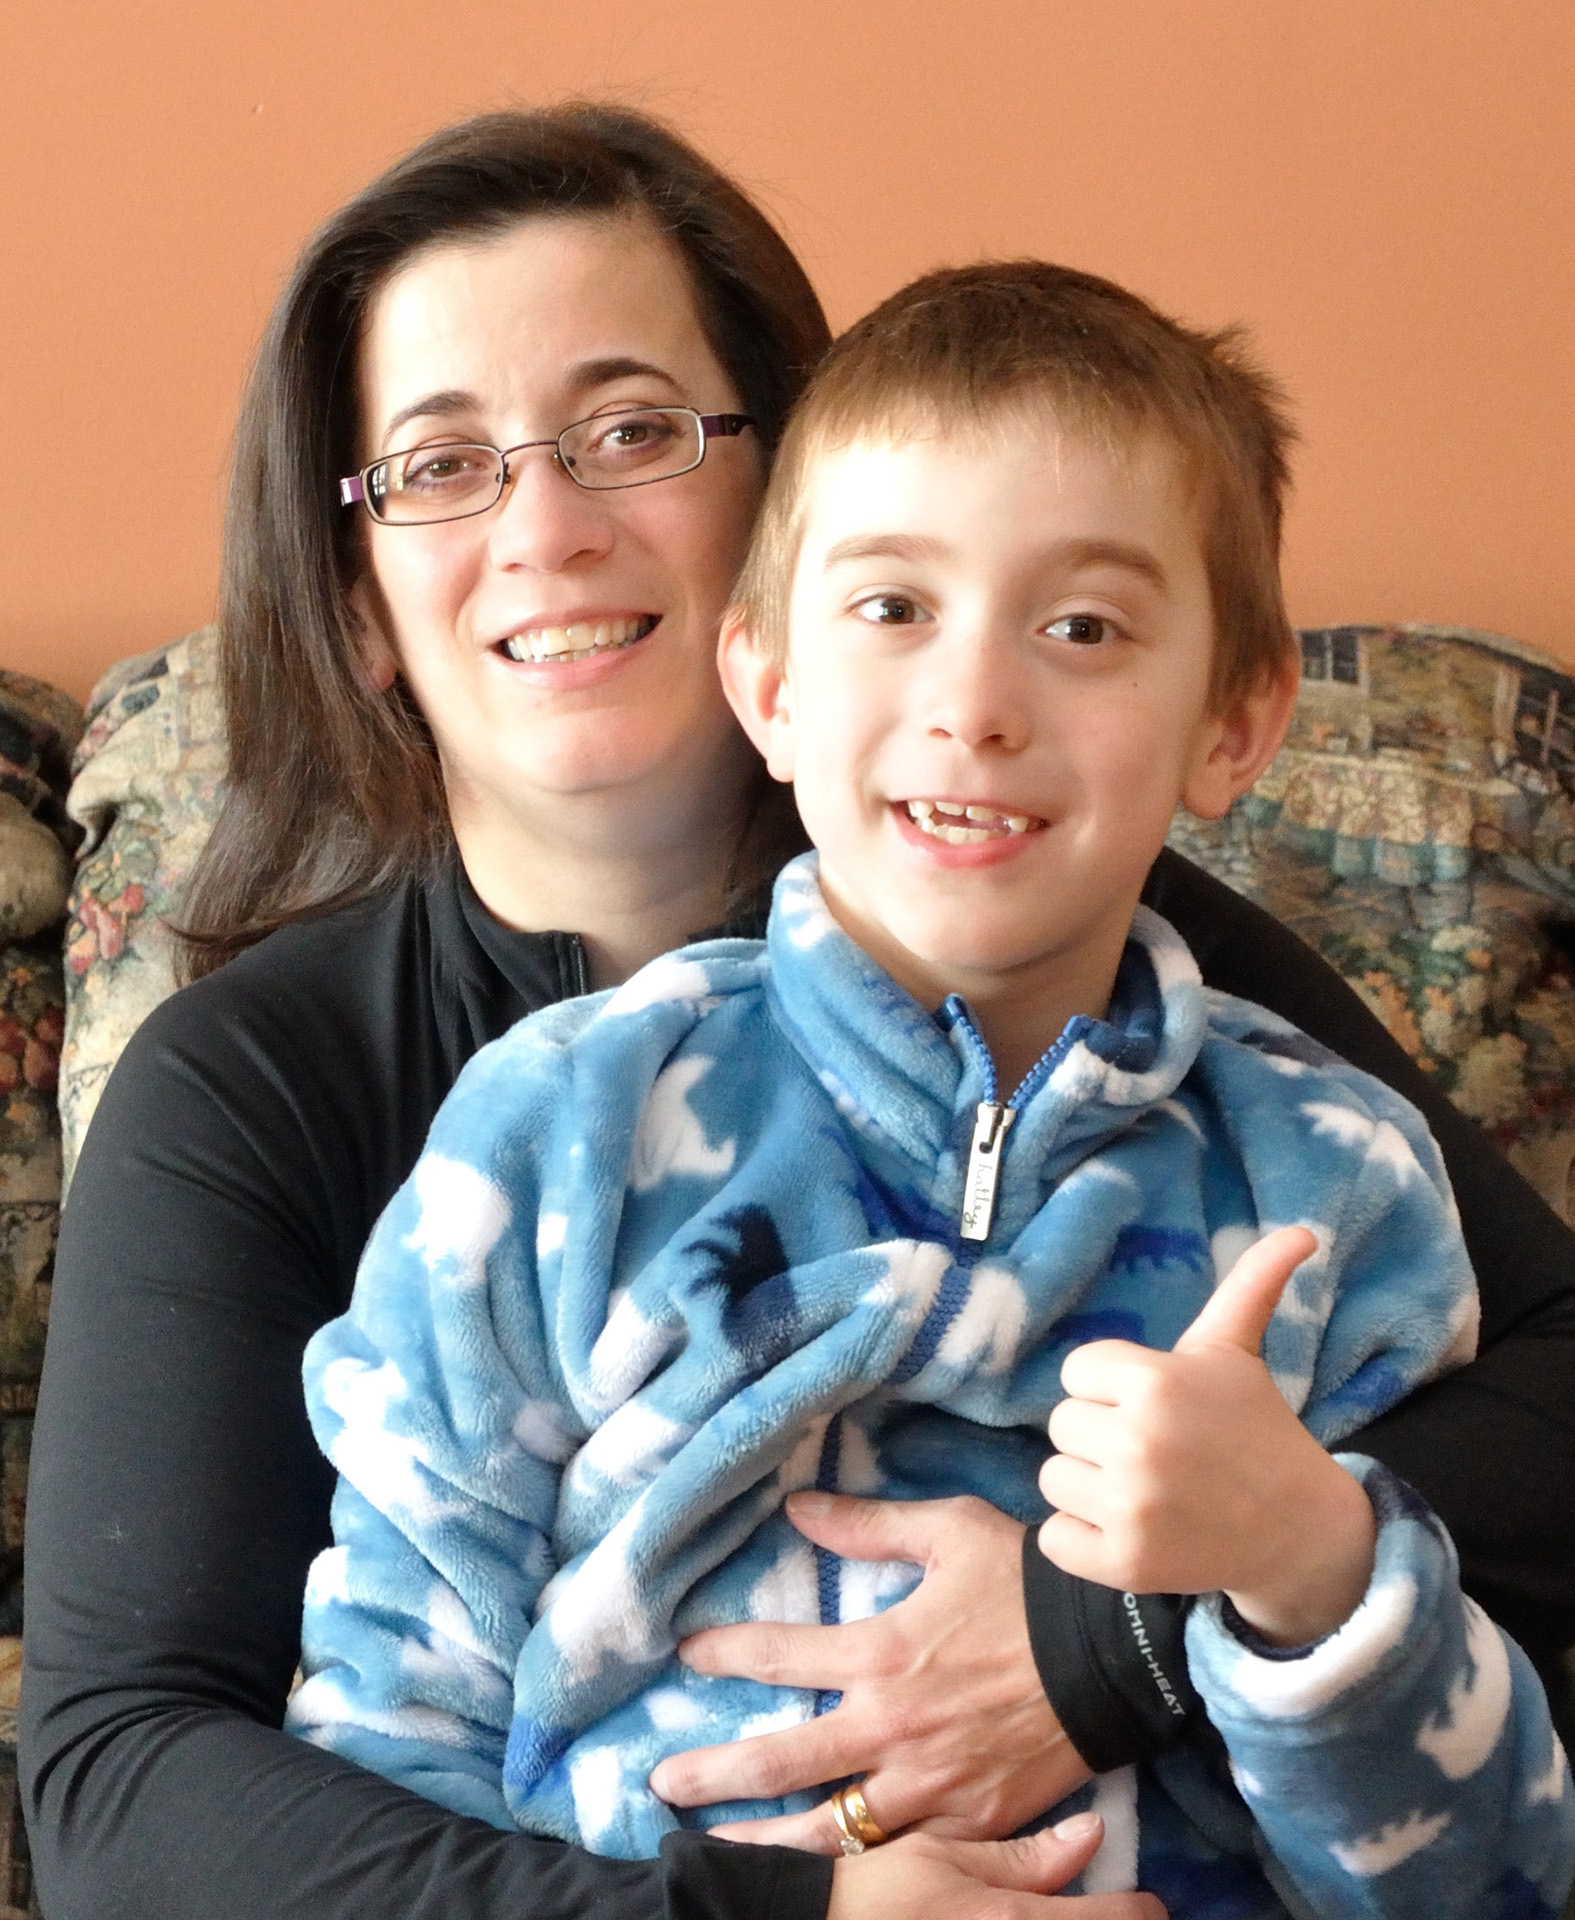 Now that he’s being treated for Muckle-Wells syndrome, Liam is growing “like a weed and has tons of energy”, says his mother Malinda.